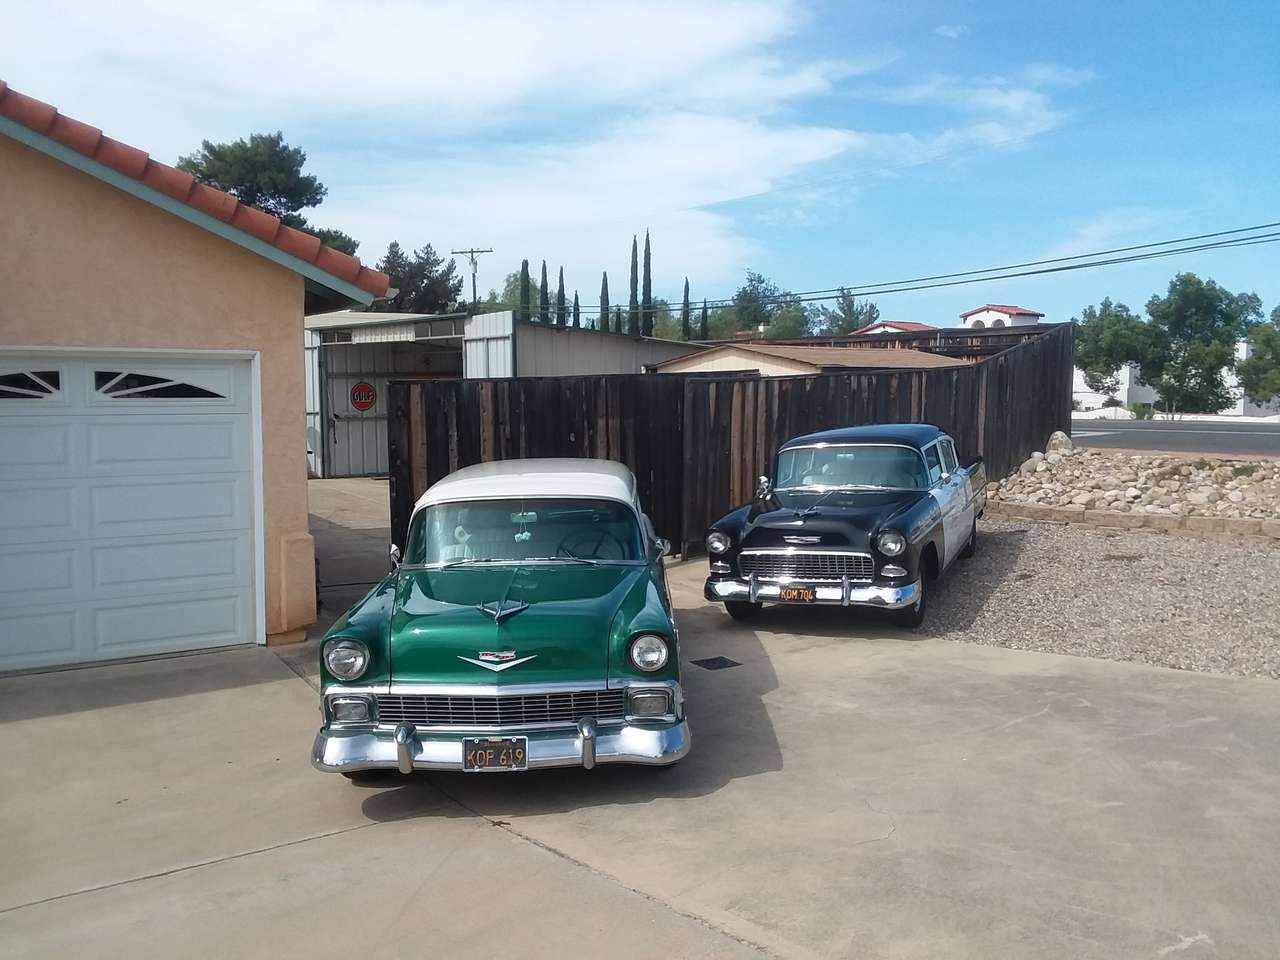 55 chevy police car & 56 chevy wagon online puzzle